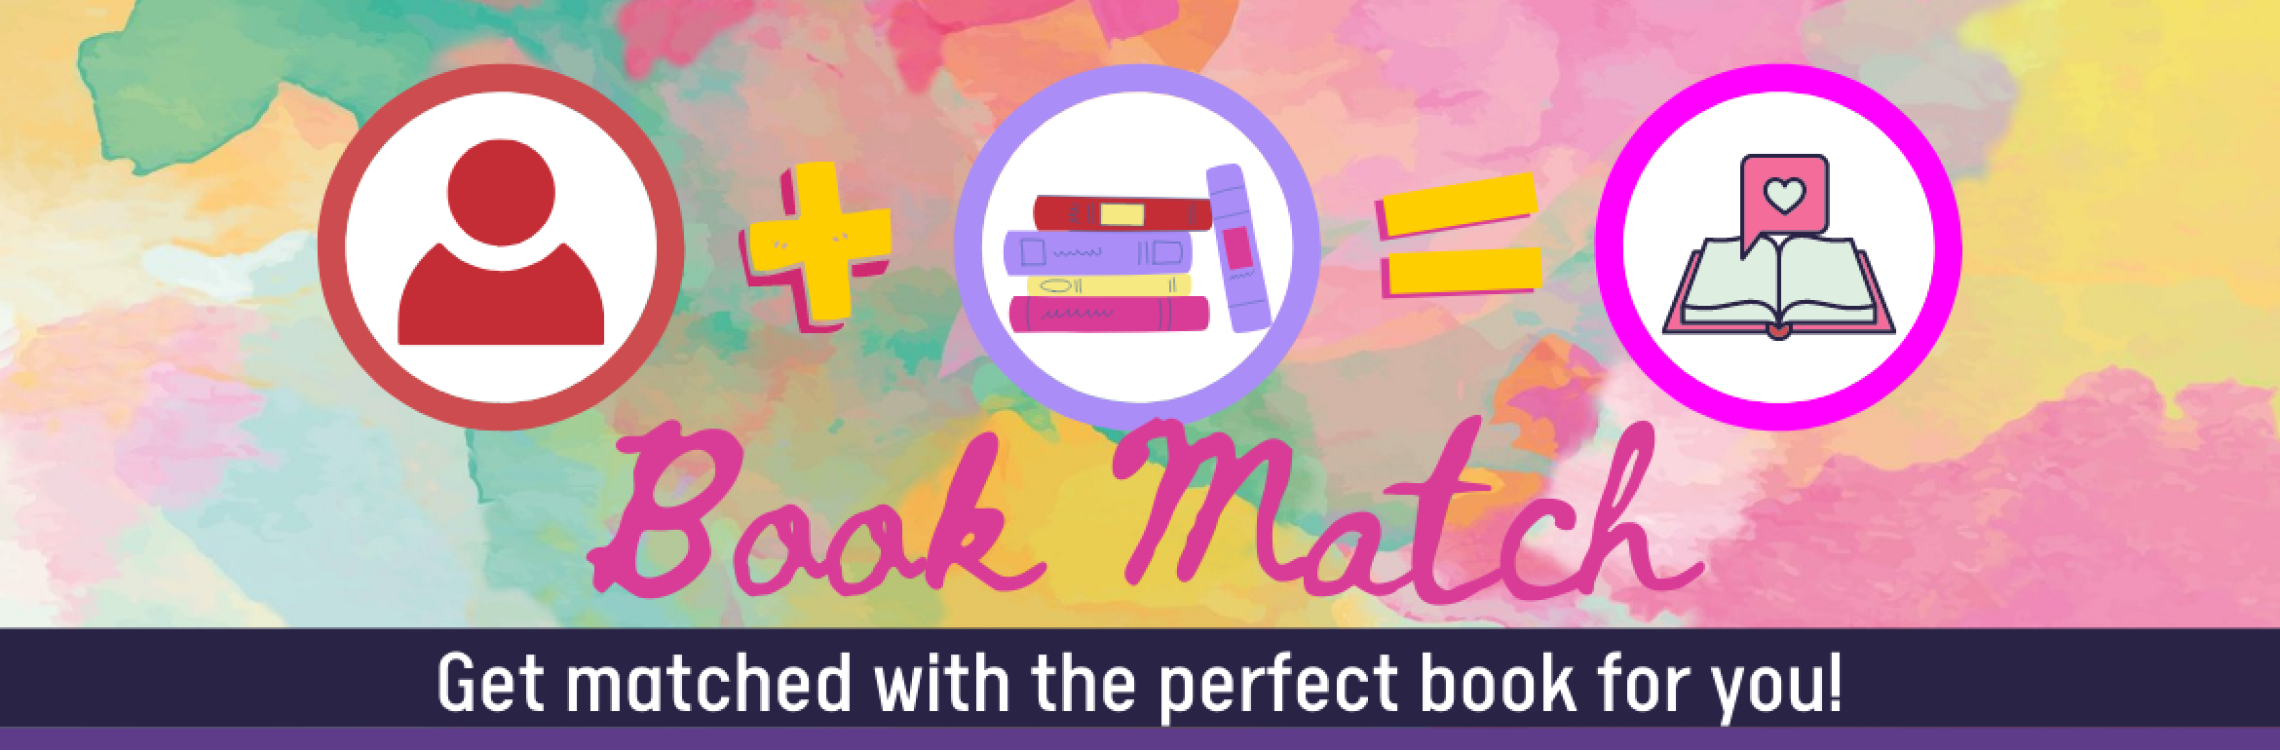 Get matched with the perfect book for you